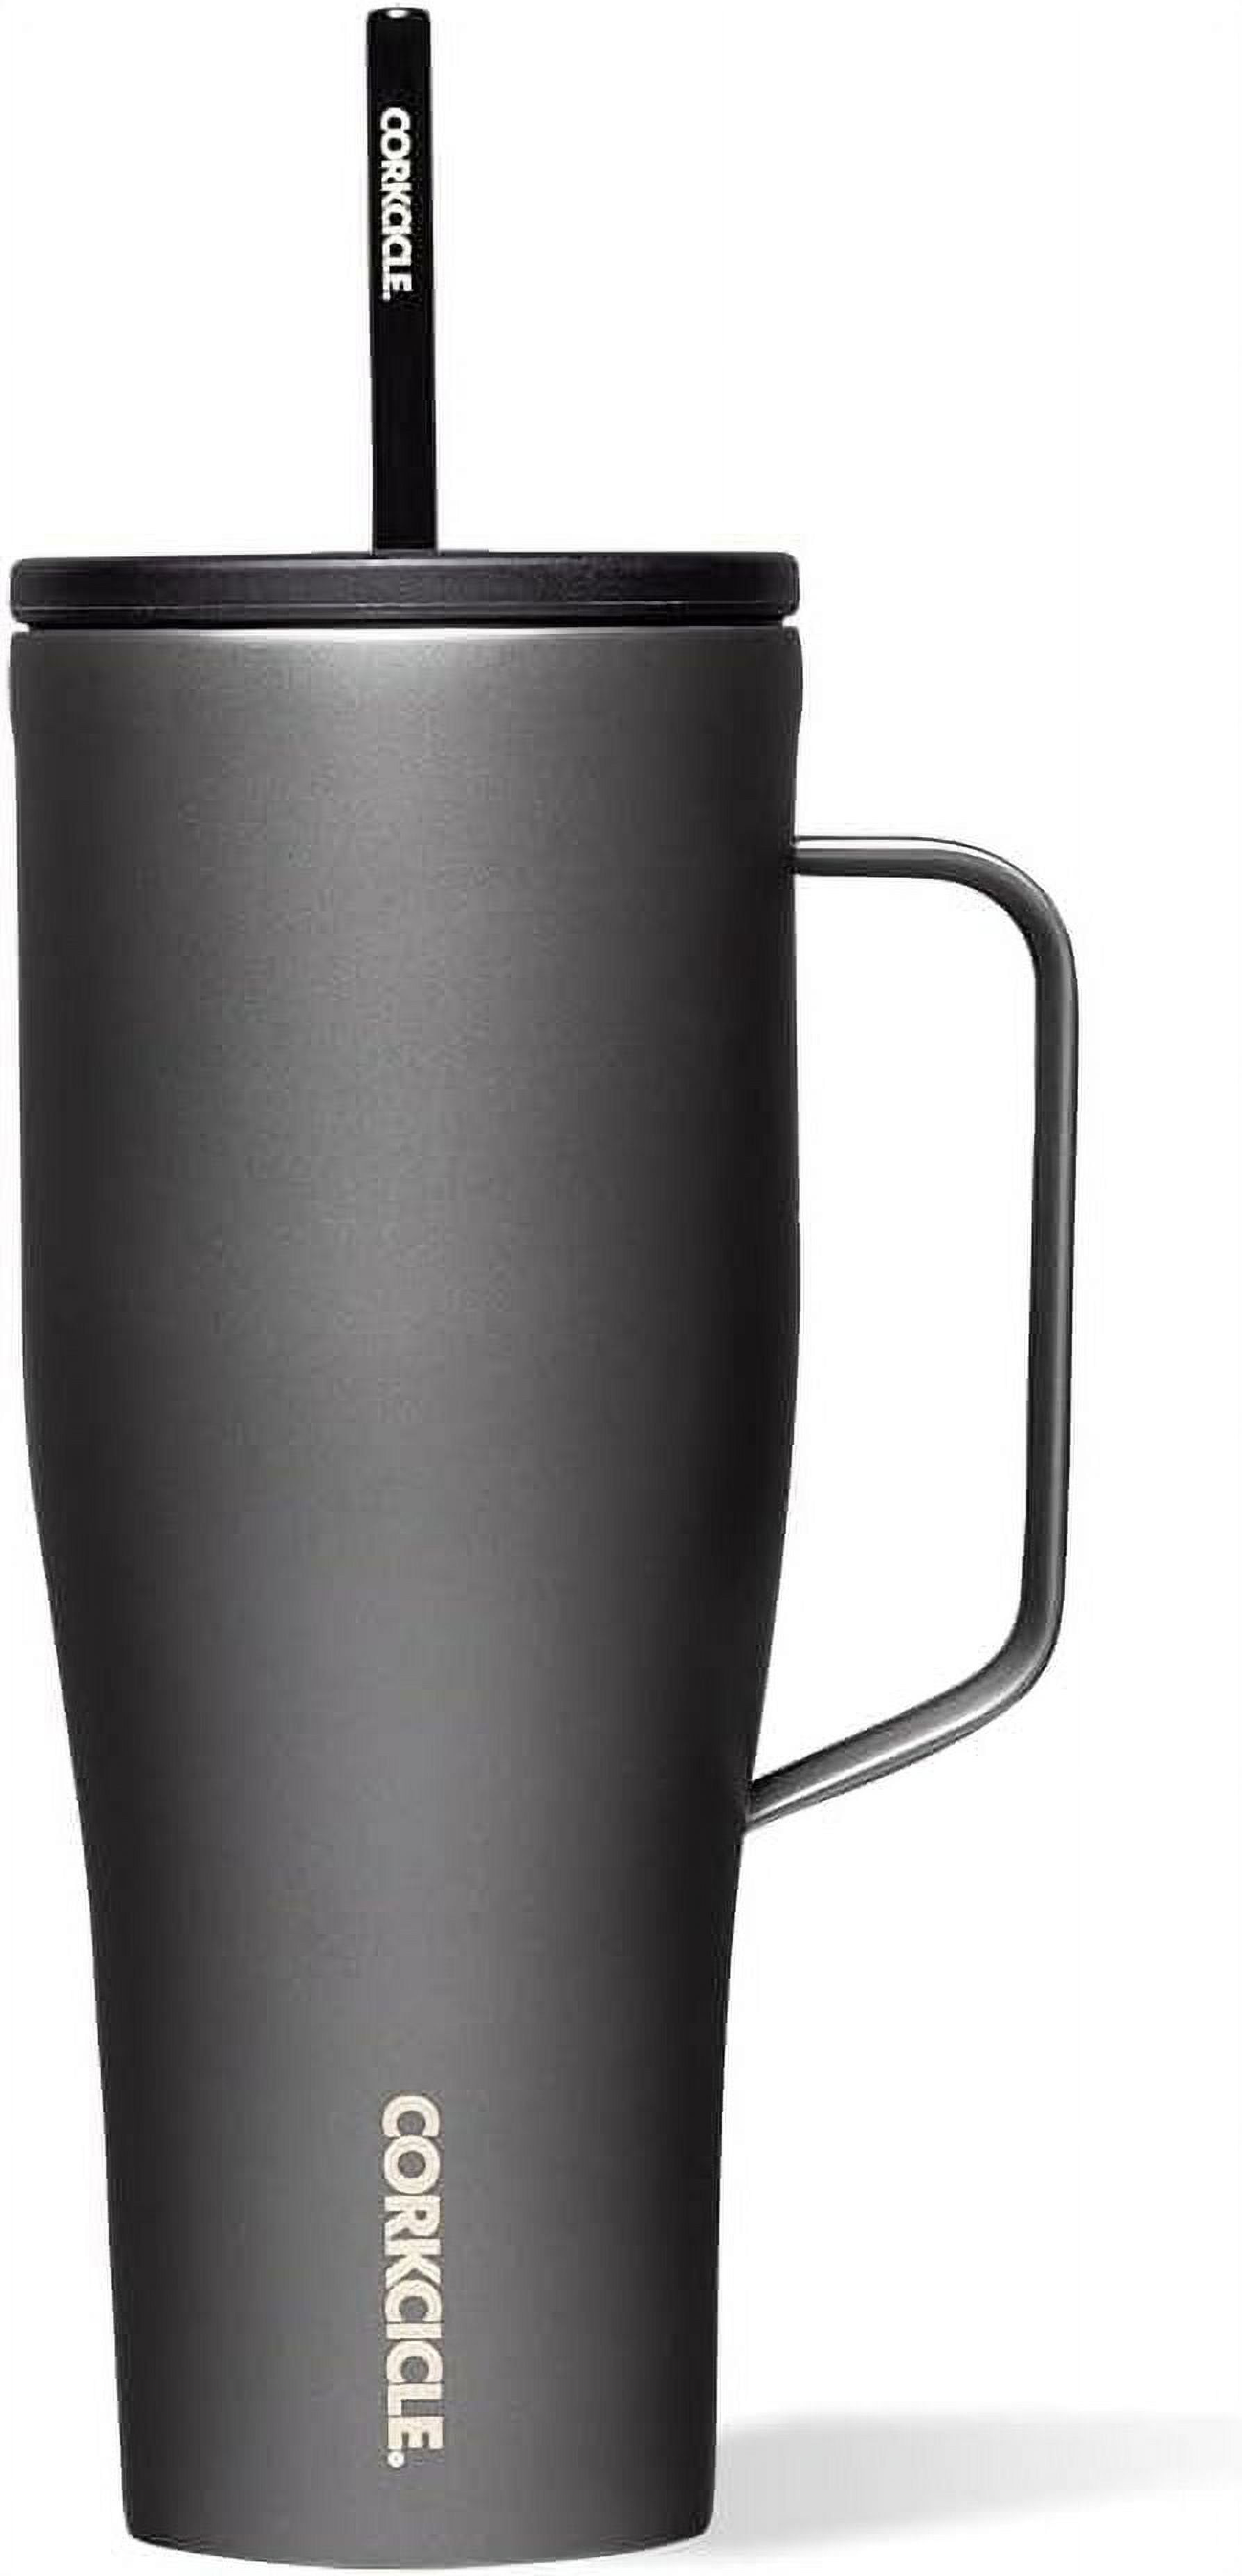 30 oz cold cup xl in gloss white – Vada Winter